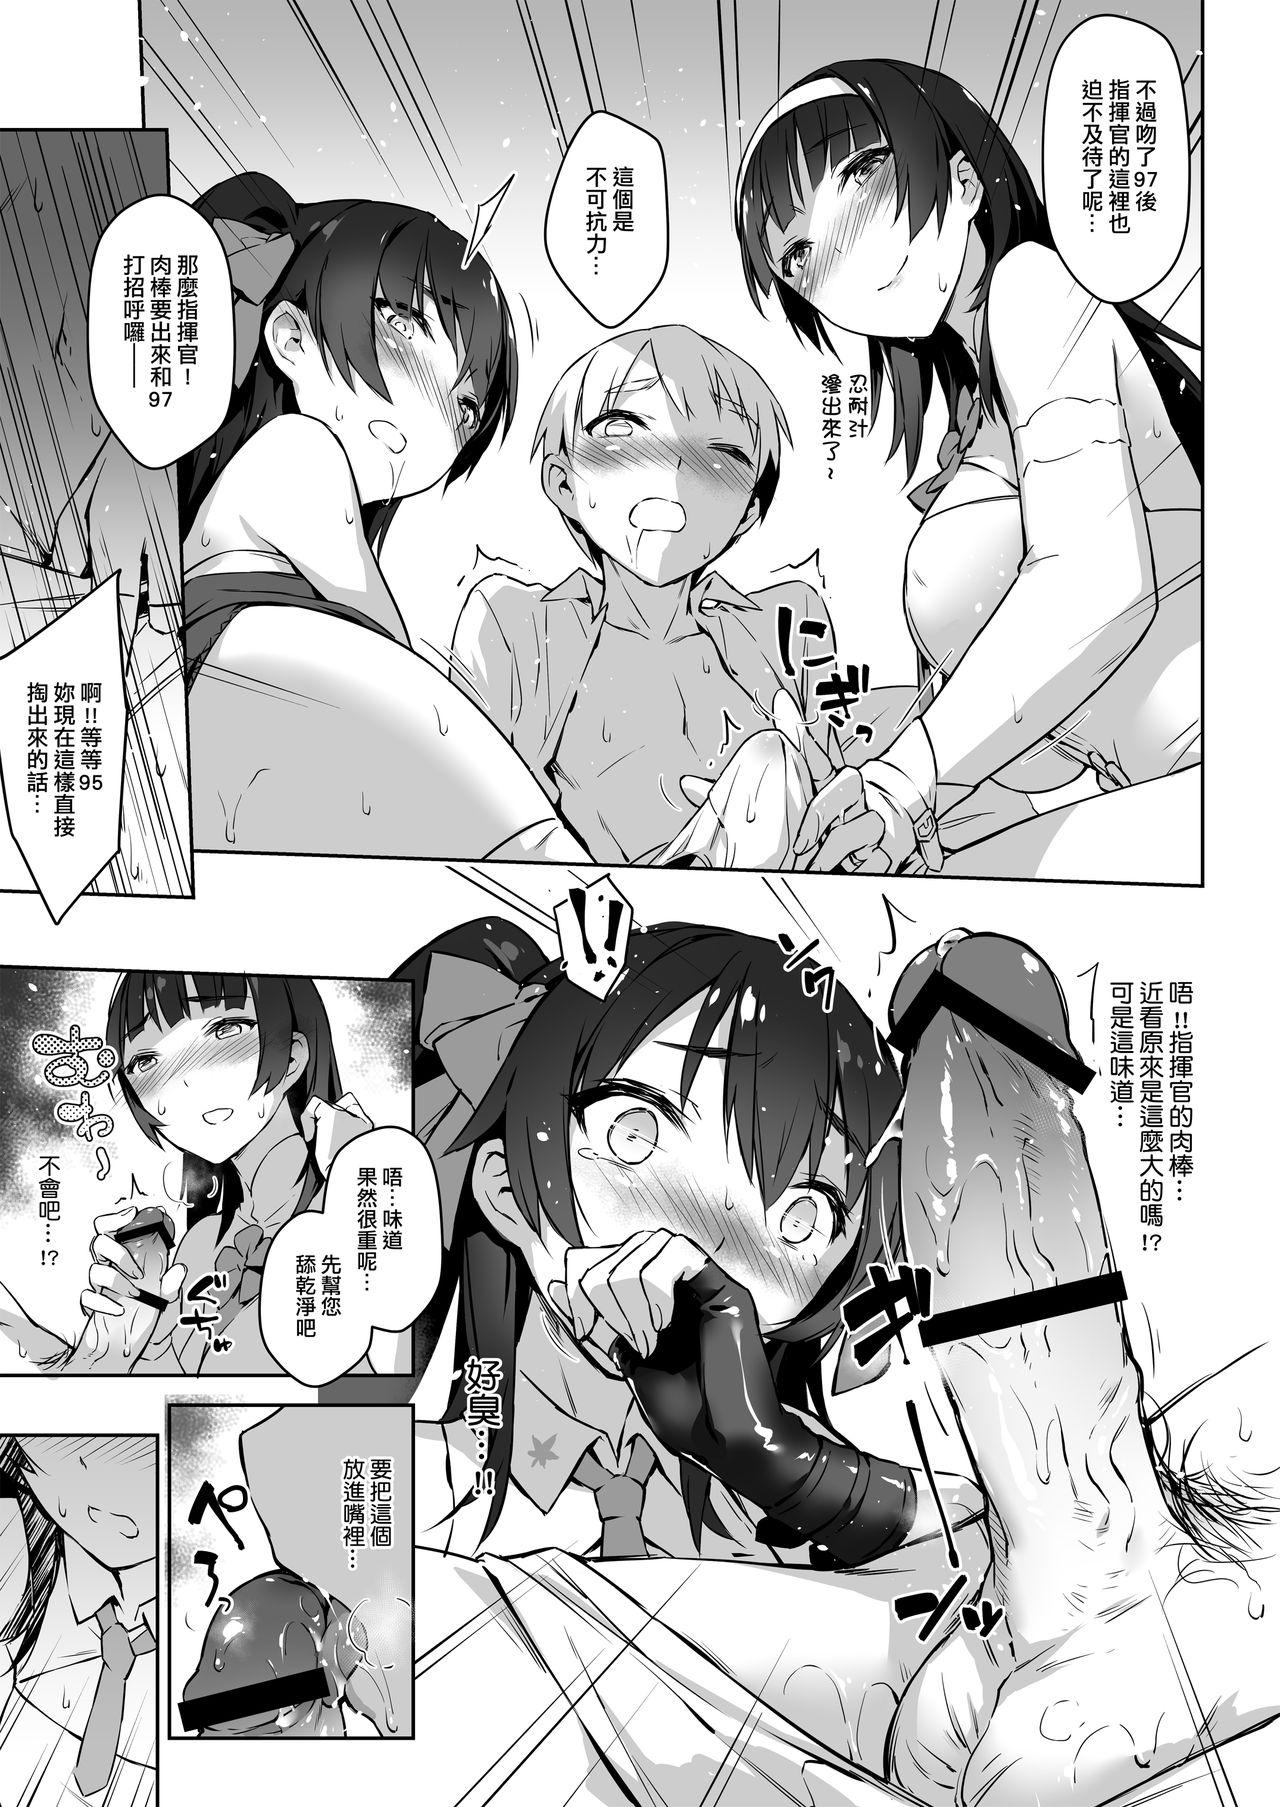 Cam Type 95 Type 97, Let Sister Teaches You!! - Girls frontline Fuck Pussy - Page 11